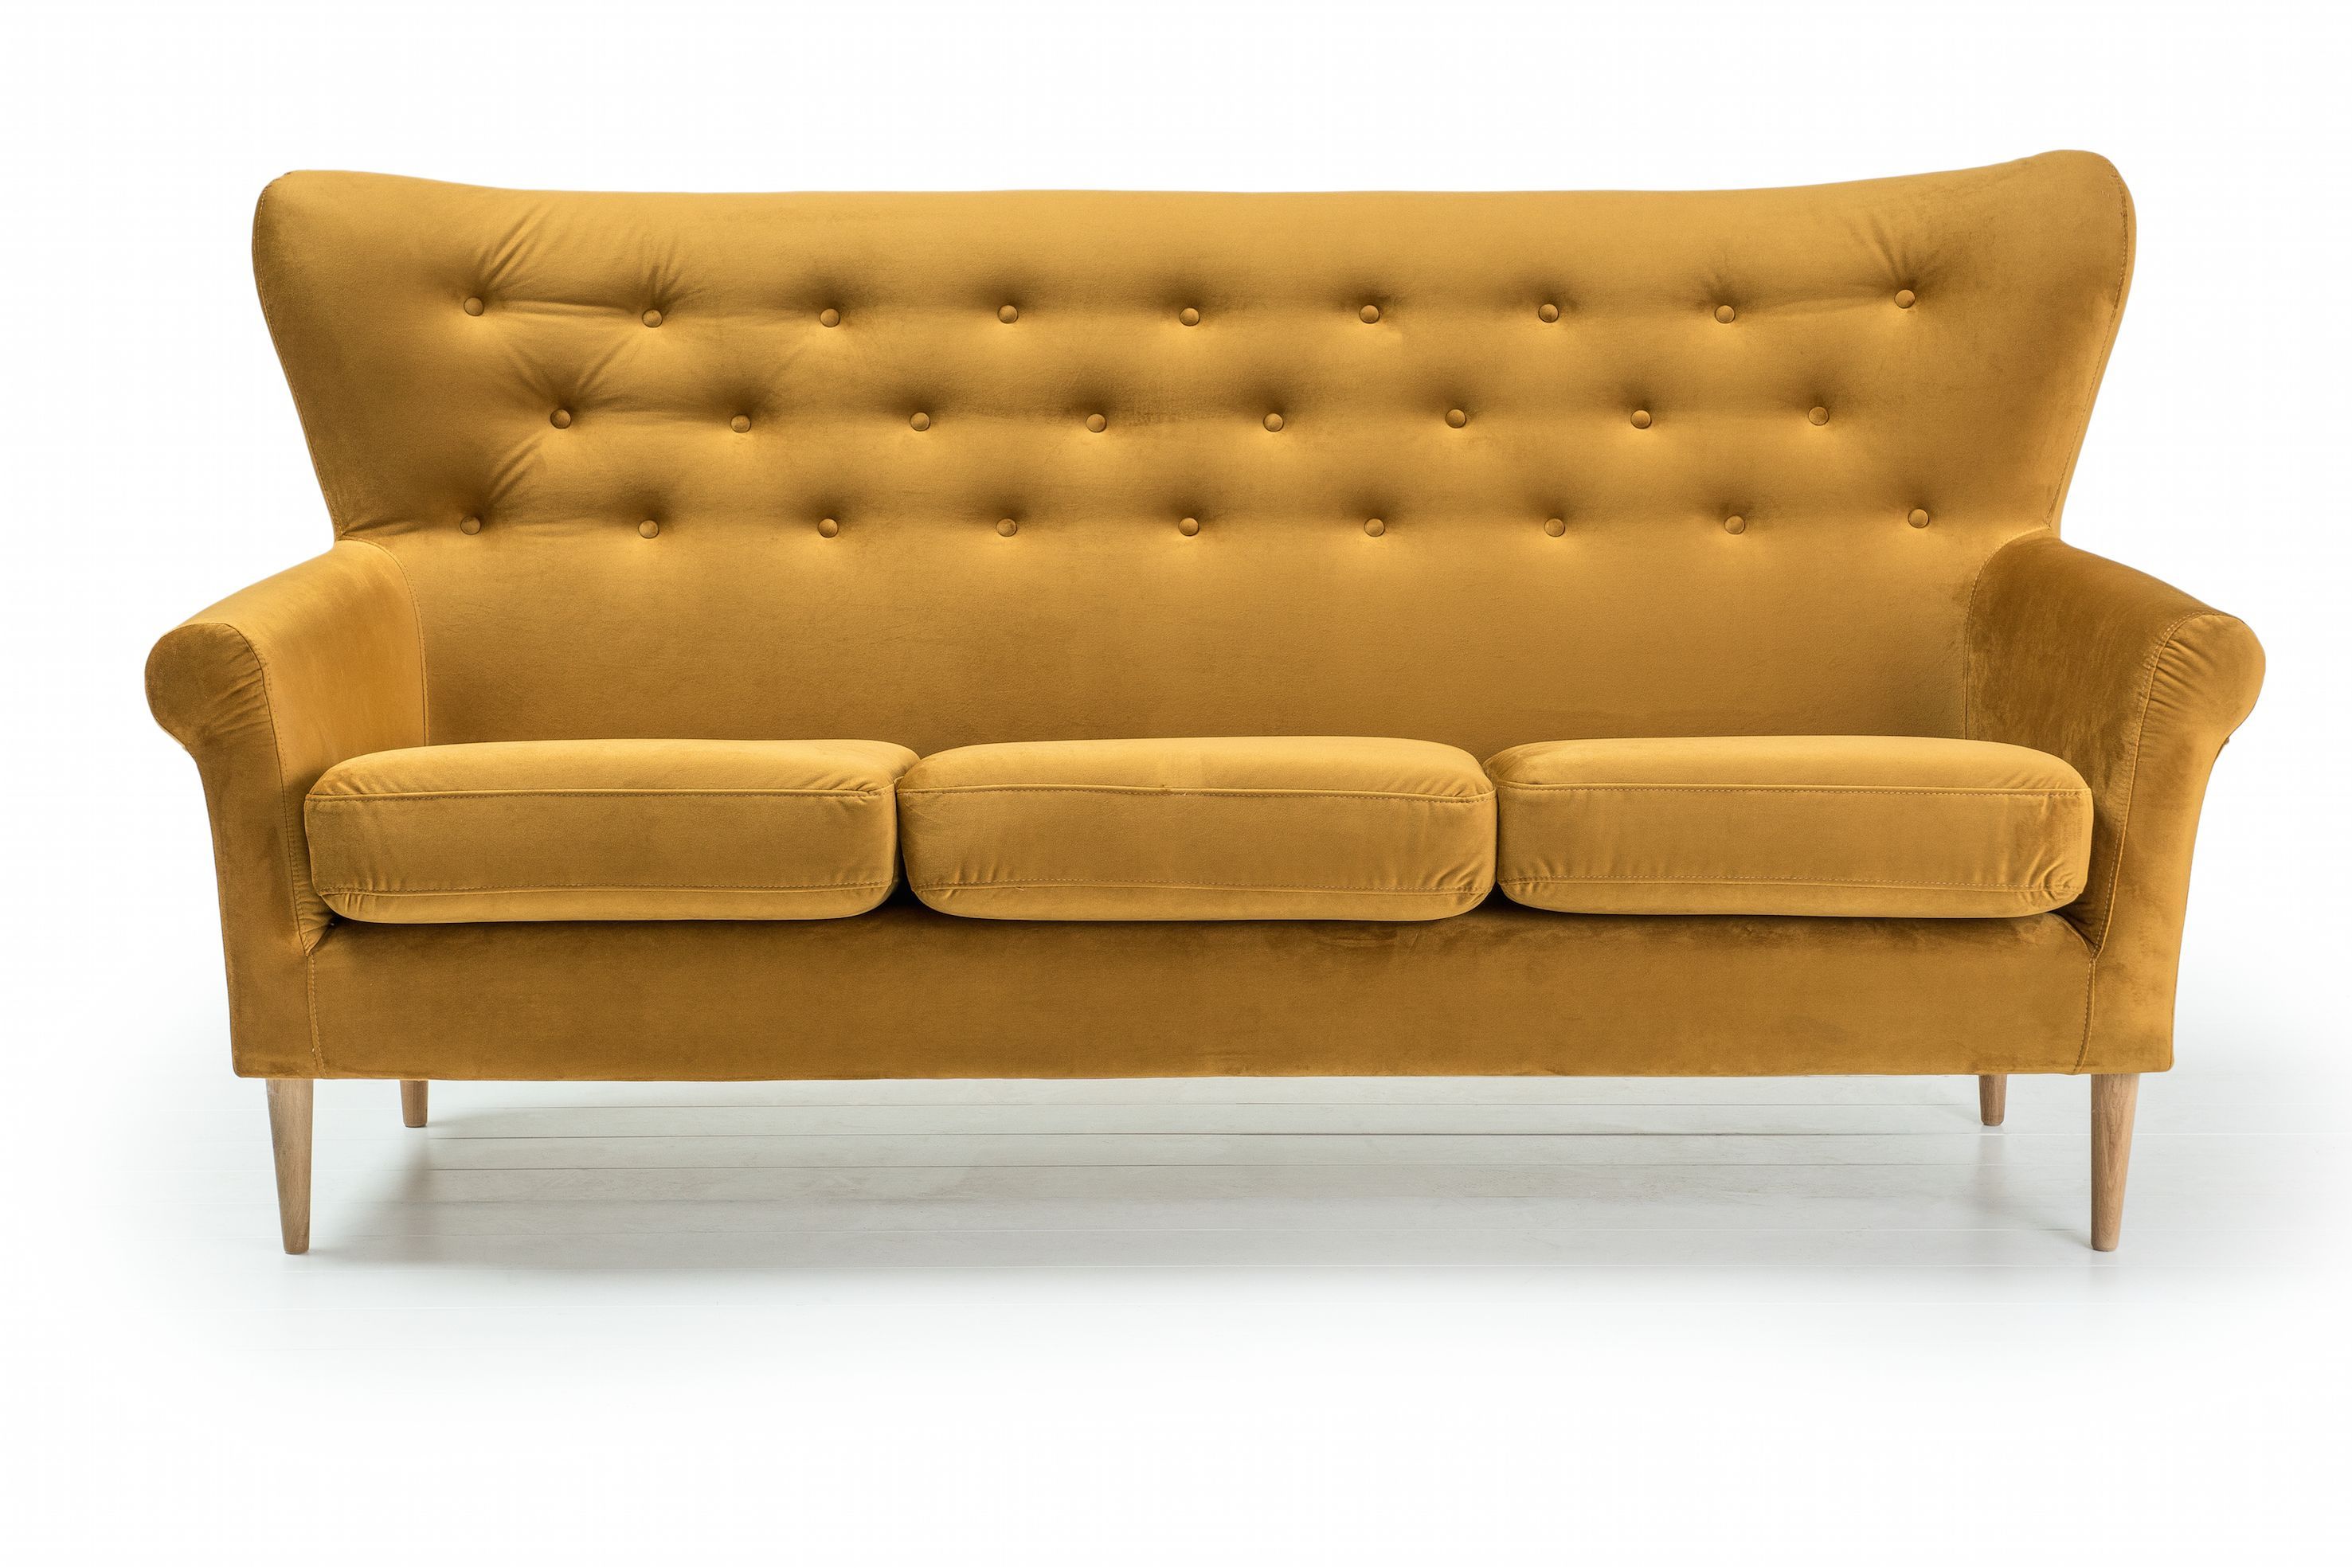 Stylish Modern Sofa With Buttons And The Wing Arms, Perfect For Loft Pertaining To Loft Arm Sofa Chairs (Photo 9 of 20)